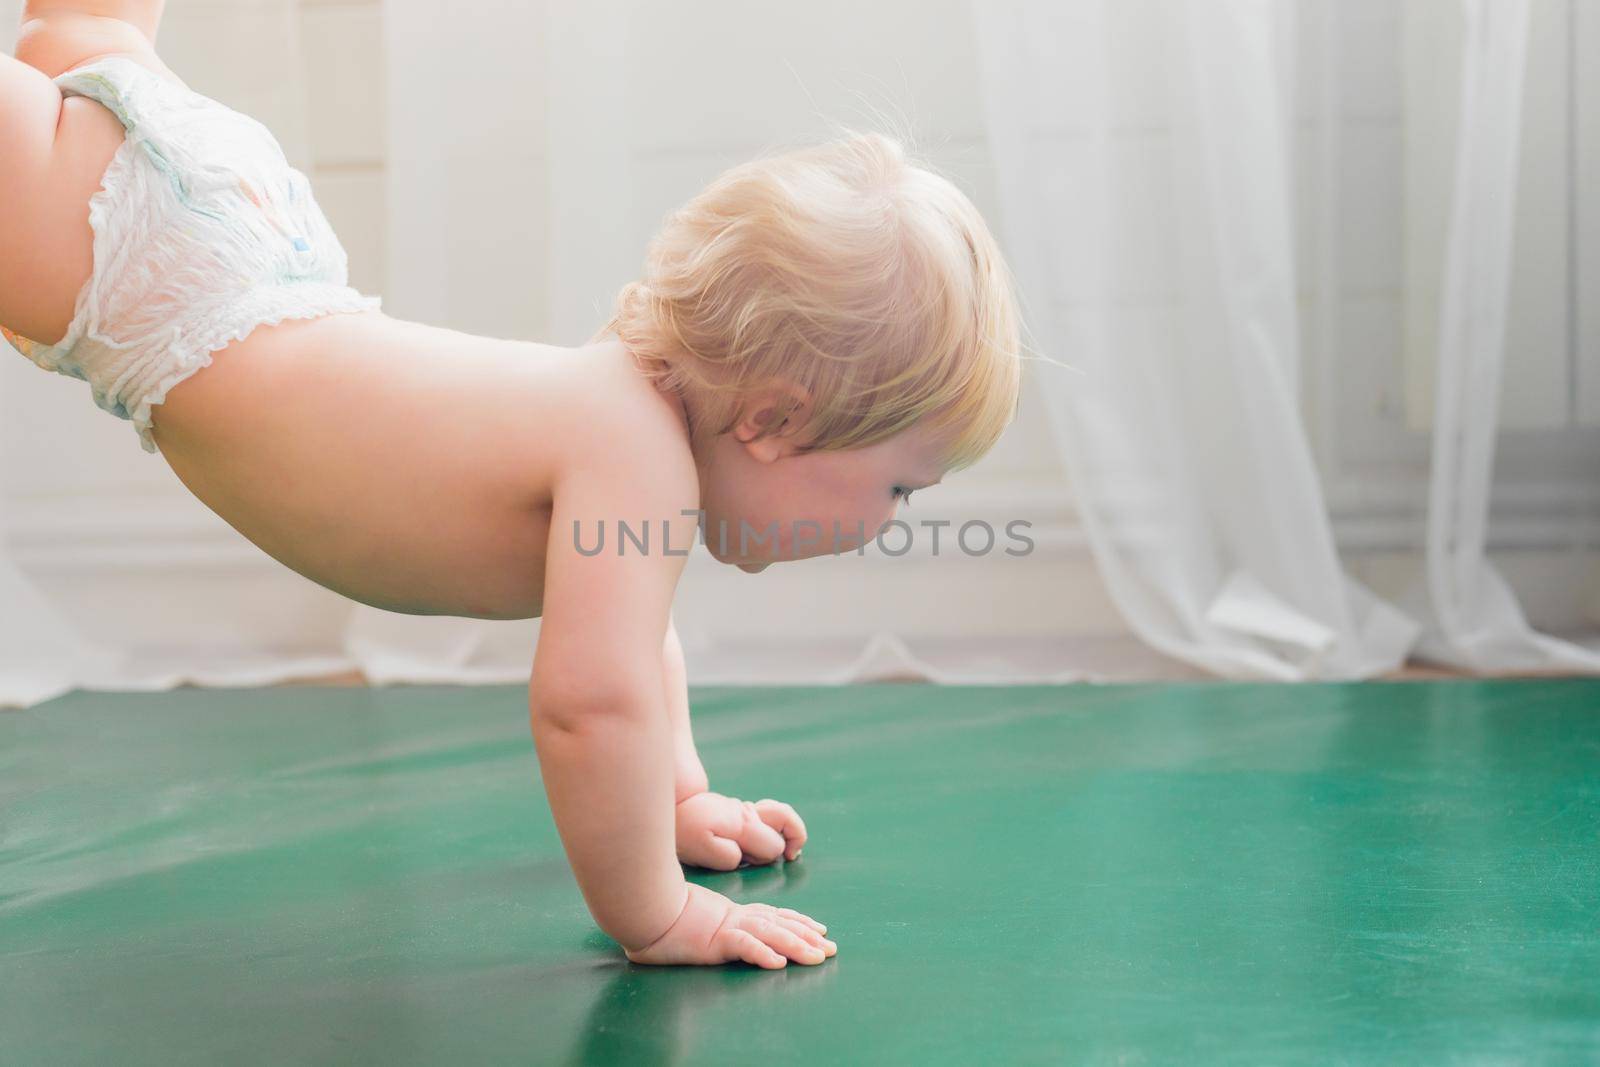 Mom holds the baby by the legs, the baby walks on the rug in her arms. by Yurich32